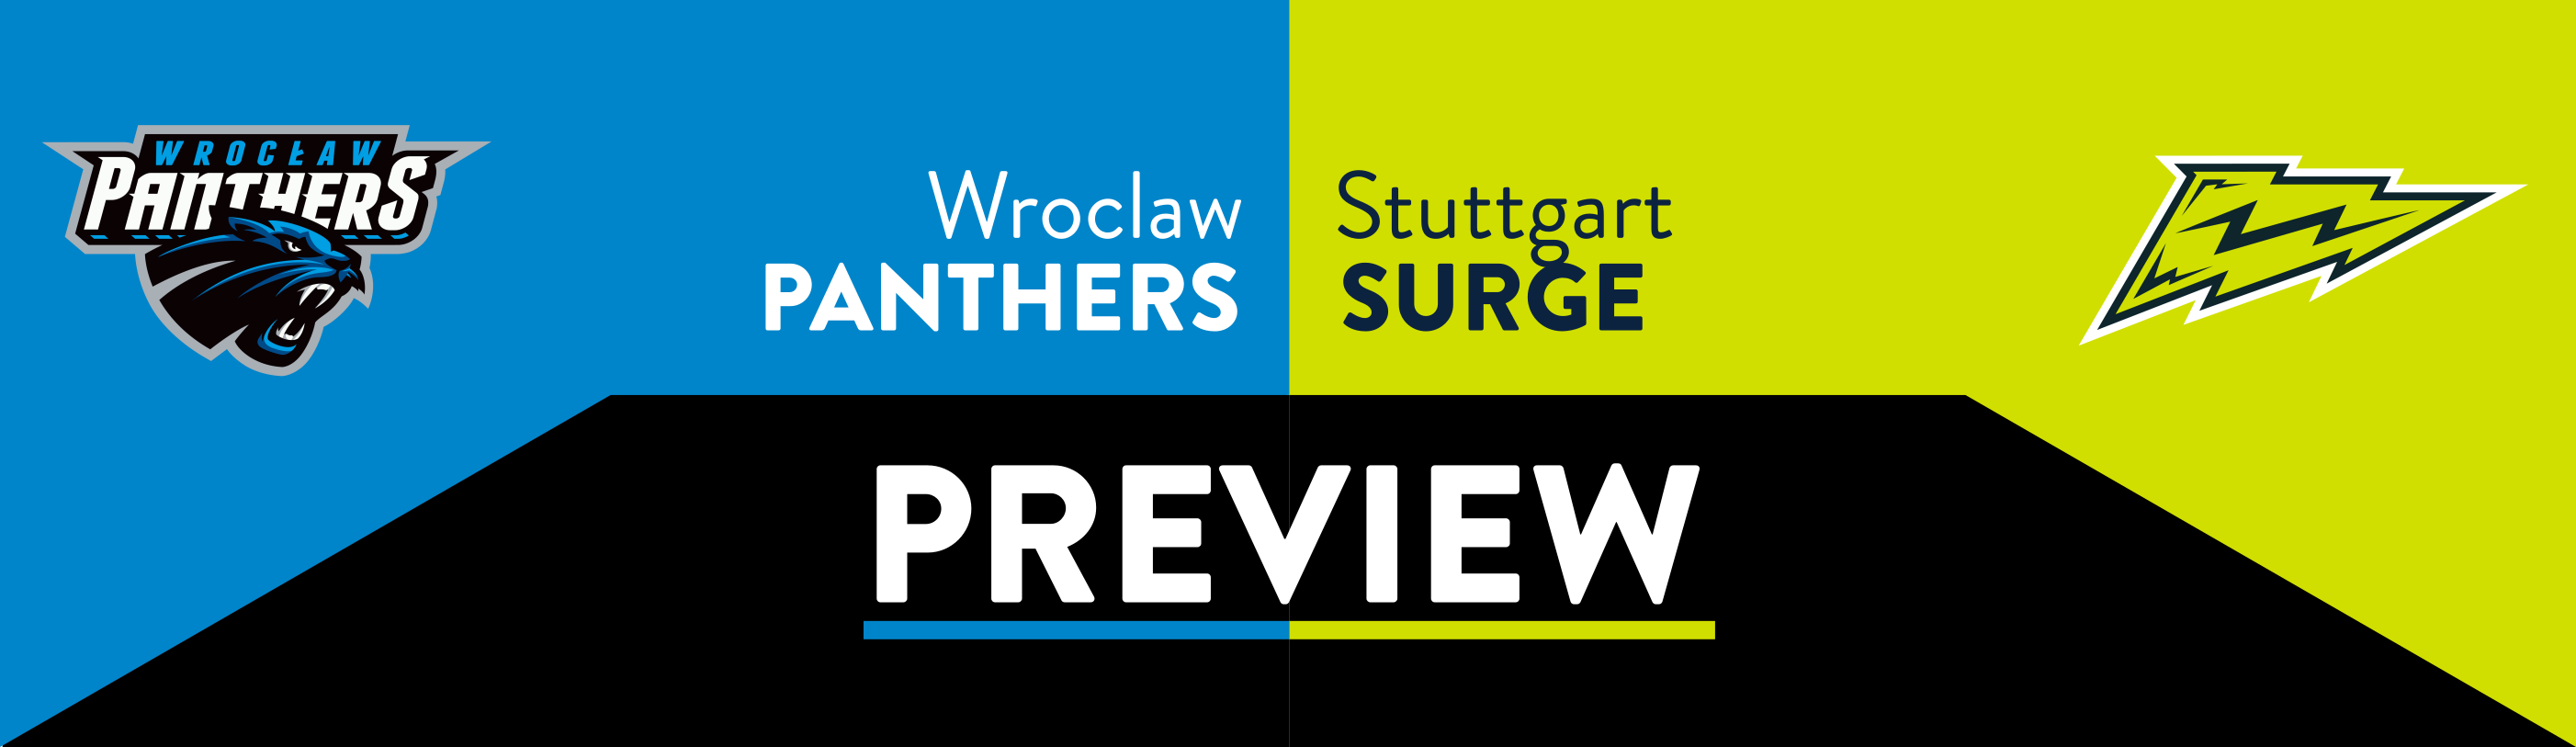 Wildcard Preview: Wroclaw Panthers @ Stuttgart Surge